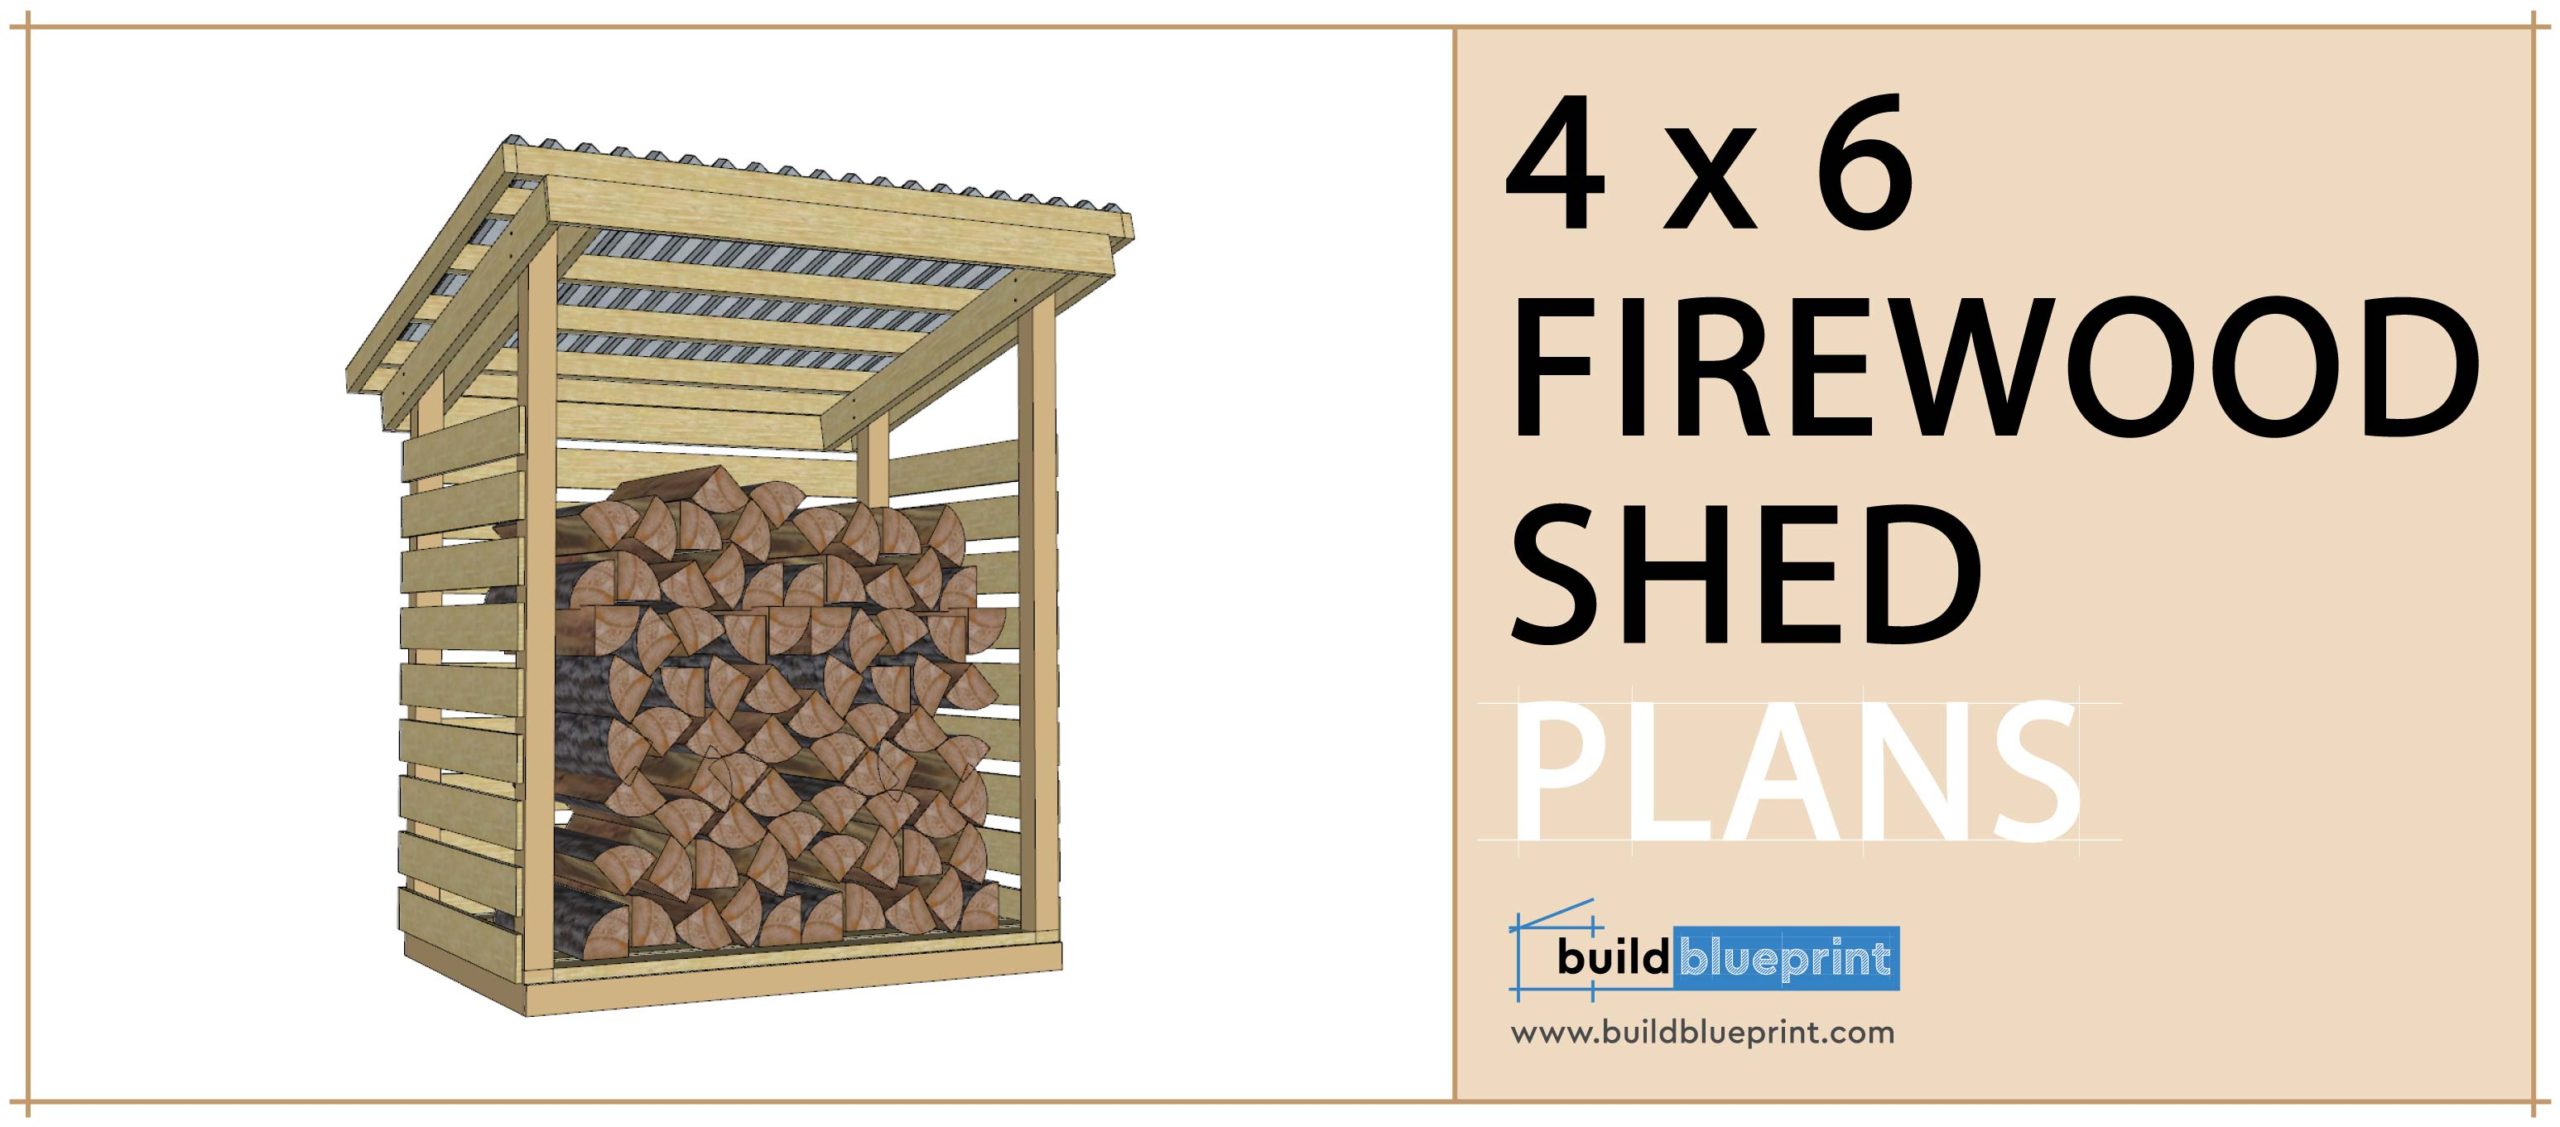 4x6 firewood shed plans